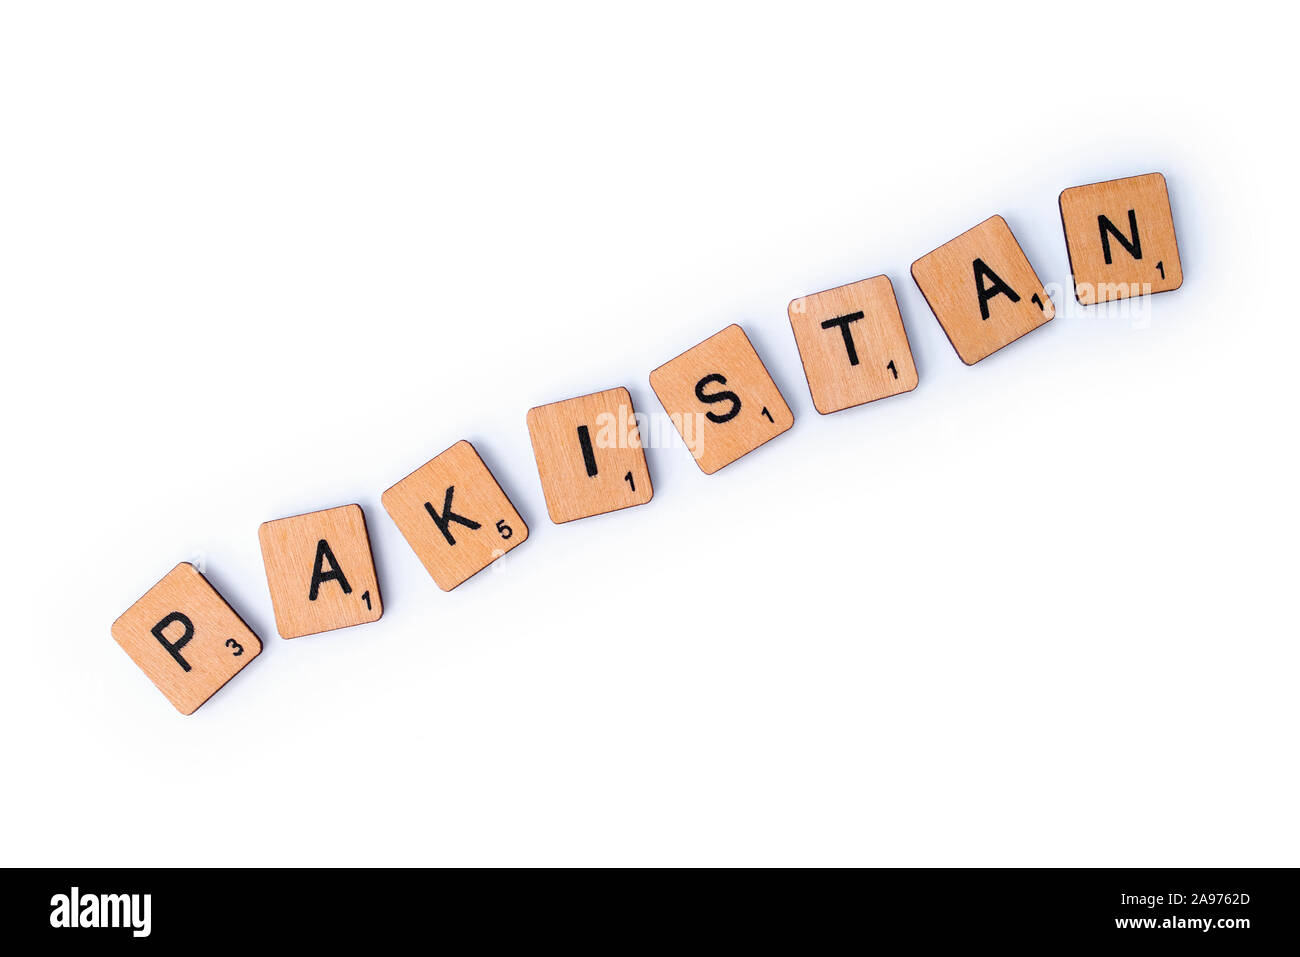 London, UK - July 8th 2019: The word PAKISTAN, spelt with wooden letter tiles over a white background. Stock Photo